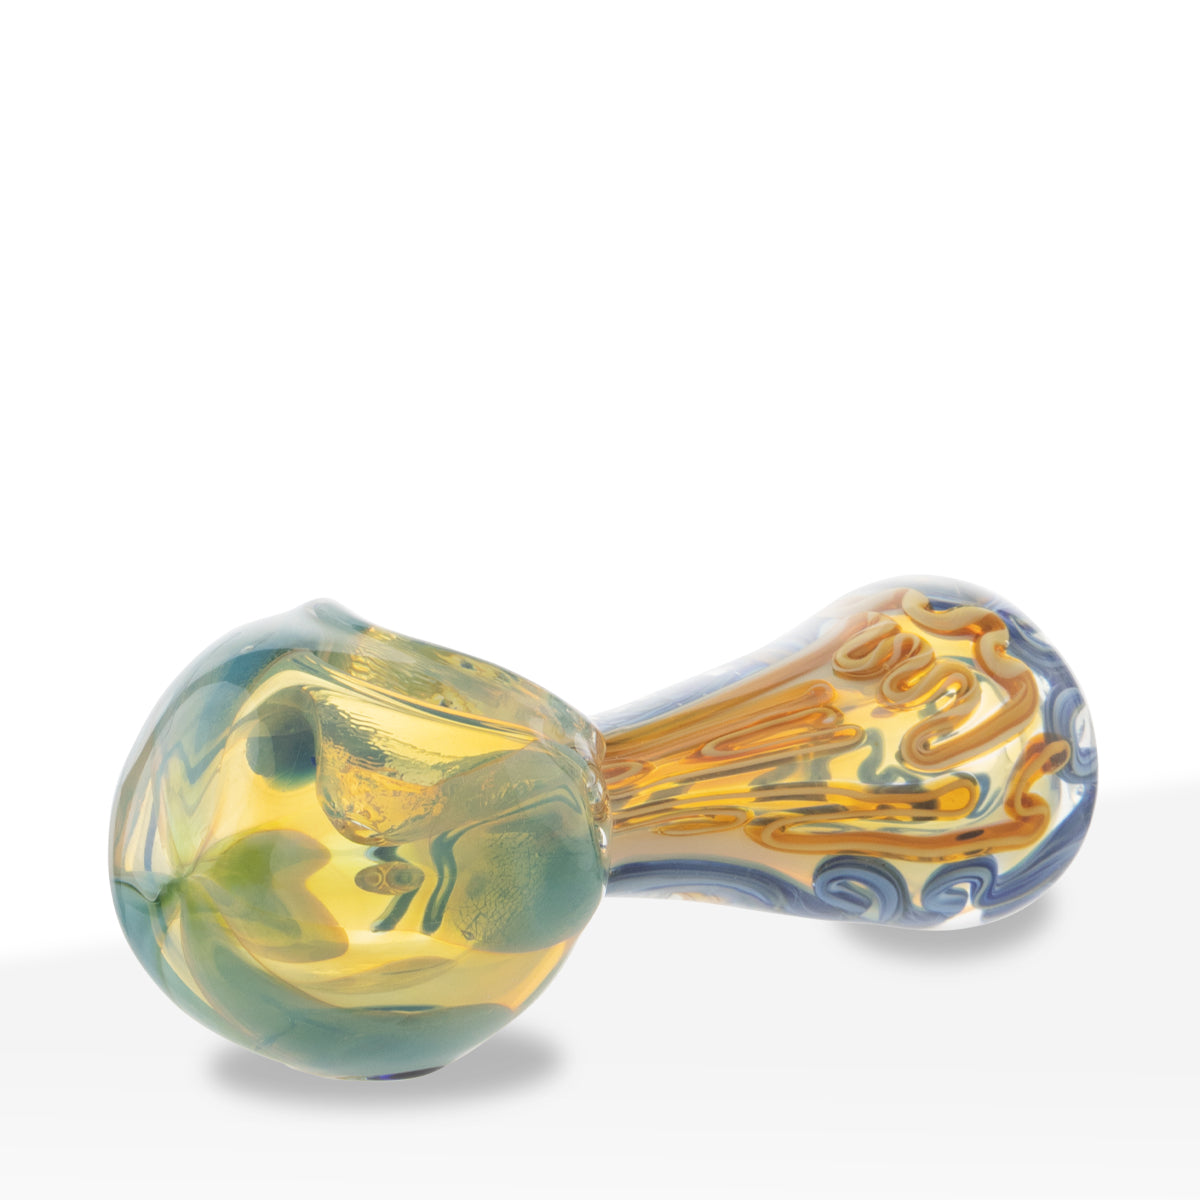 Hand Pipe | Classic Glass Spoon Heavy Double Wall Hand Pipe | 5" - Glass - Assorted Colors